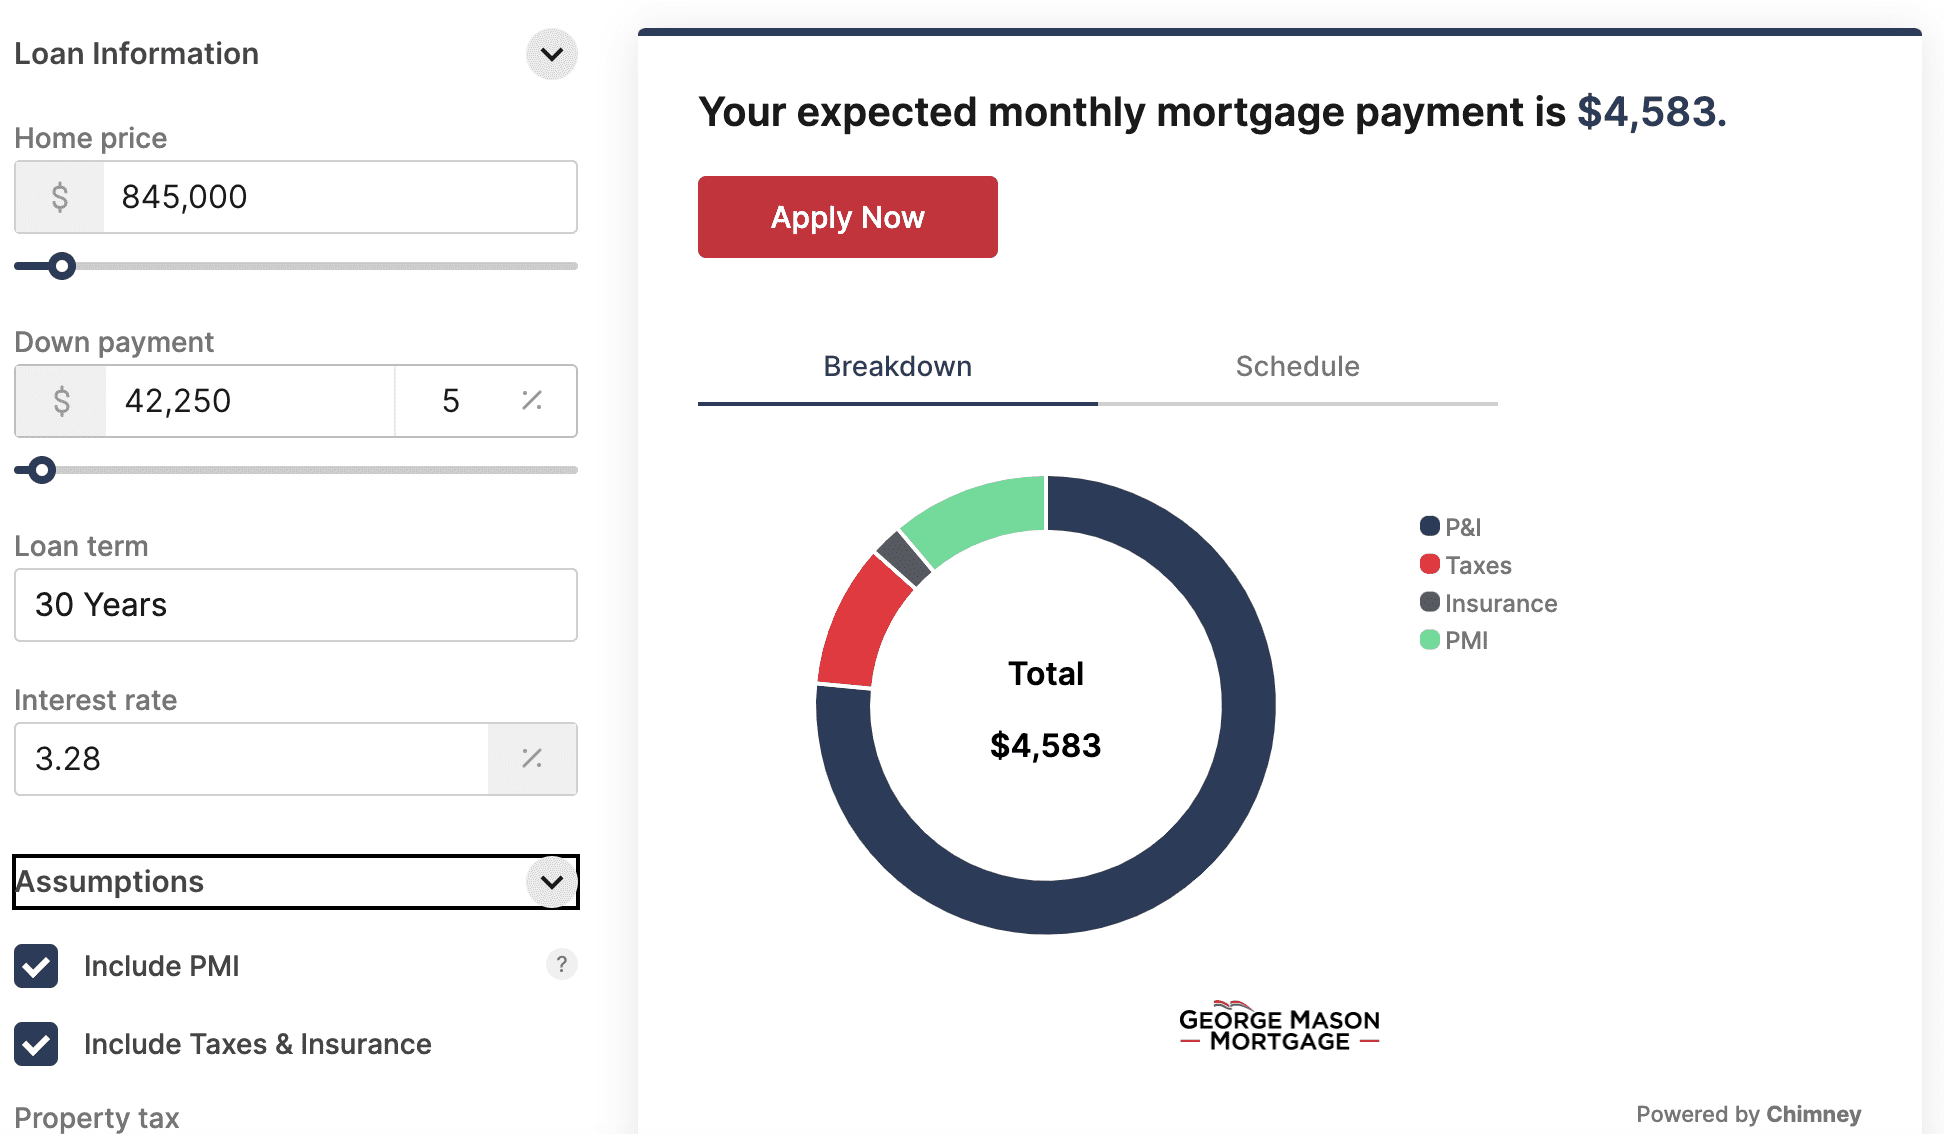 5% Down Payment